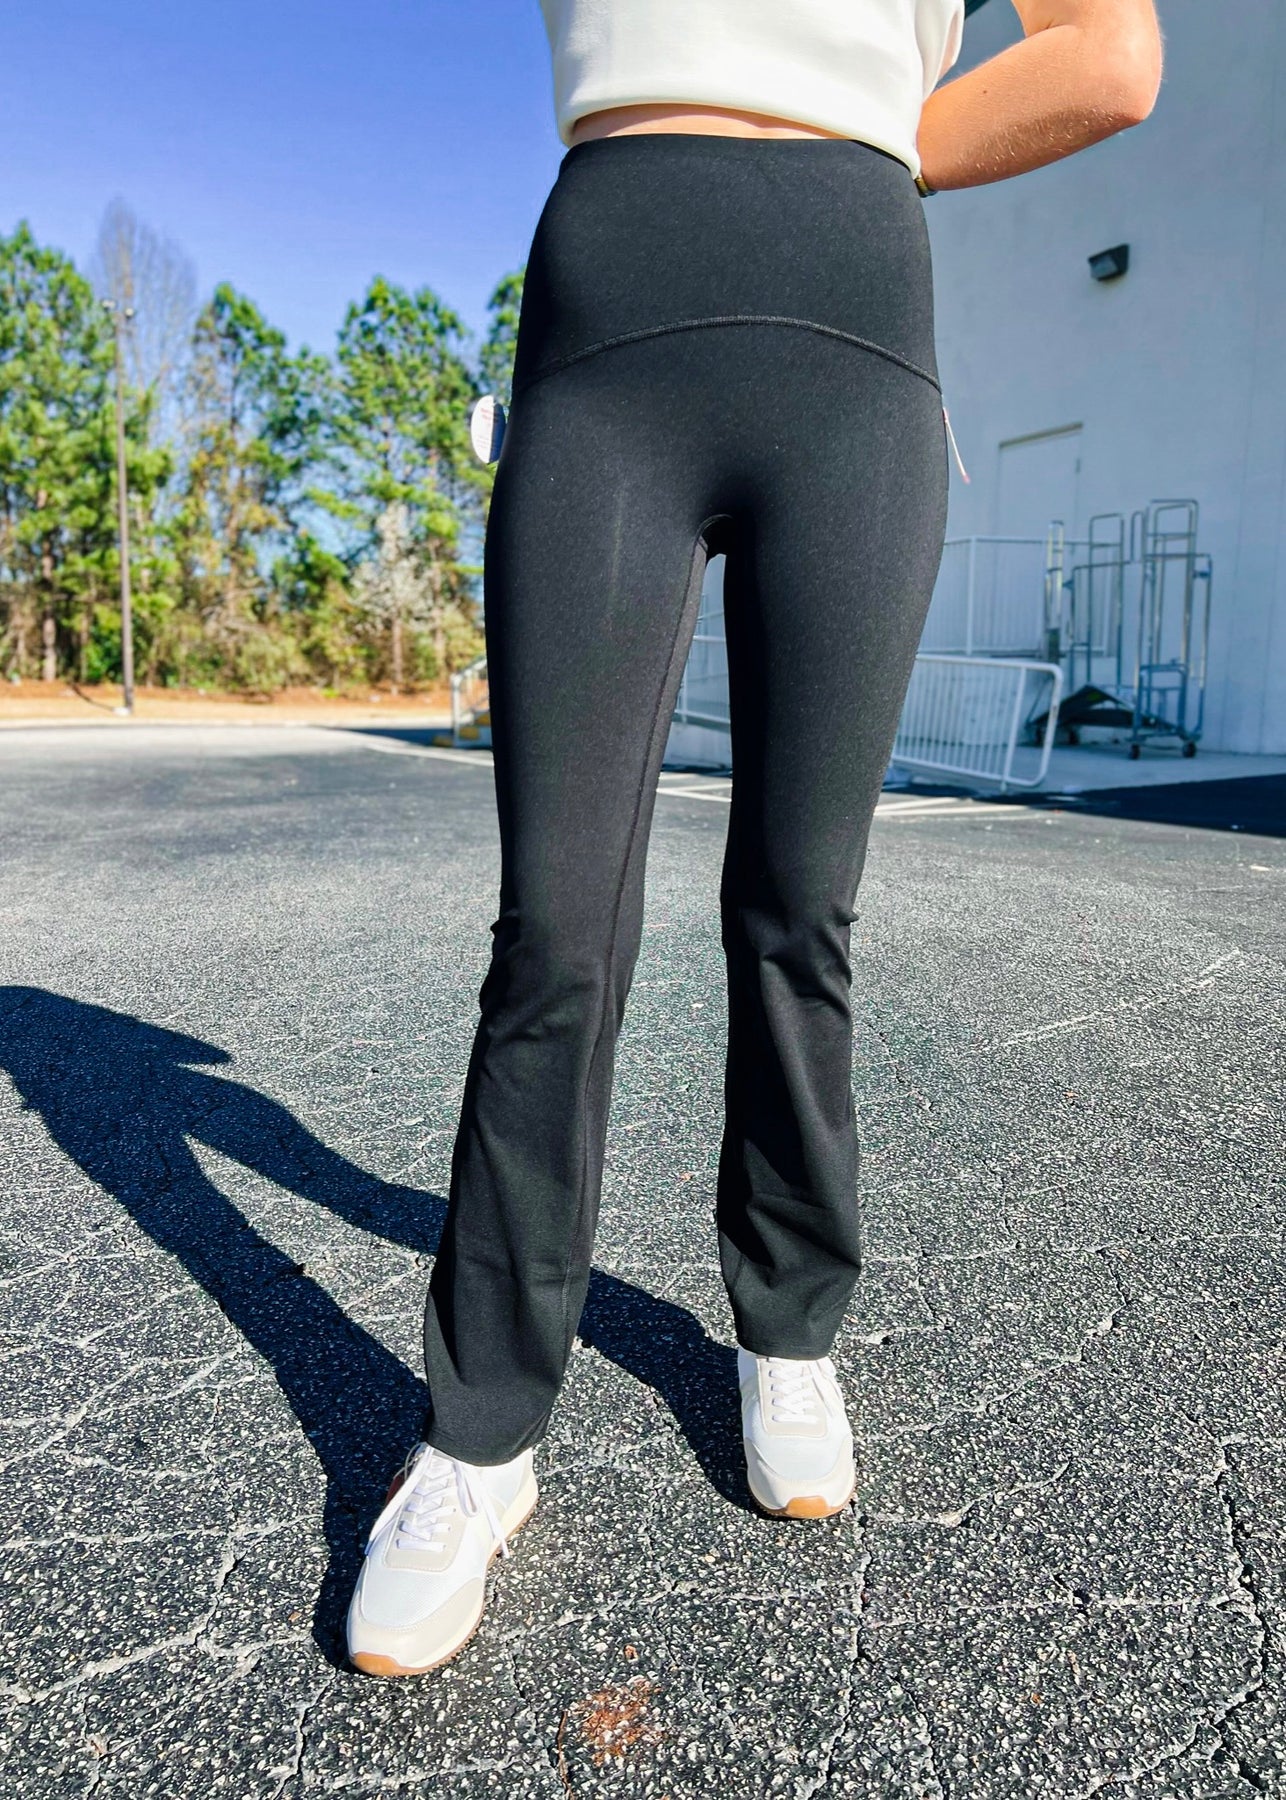 Booty Boost® Yoga Pant curated on LTK